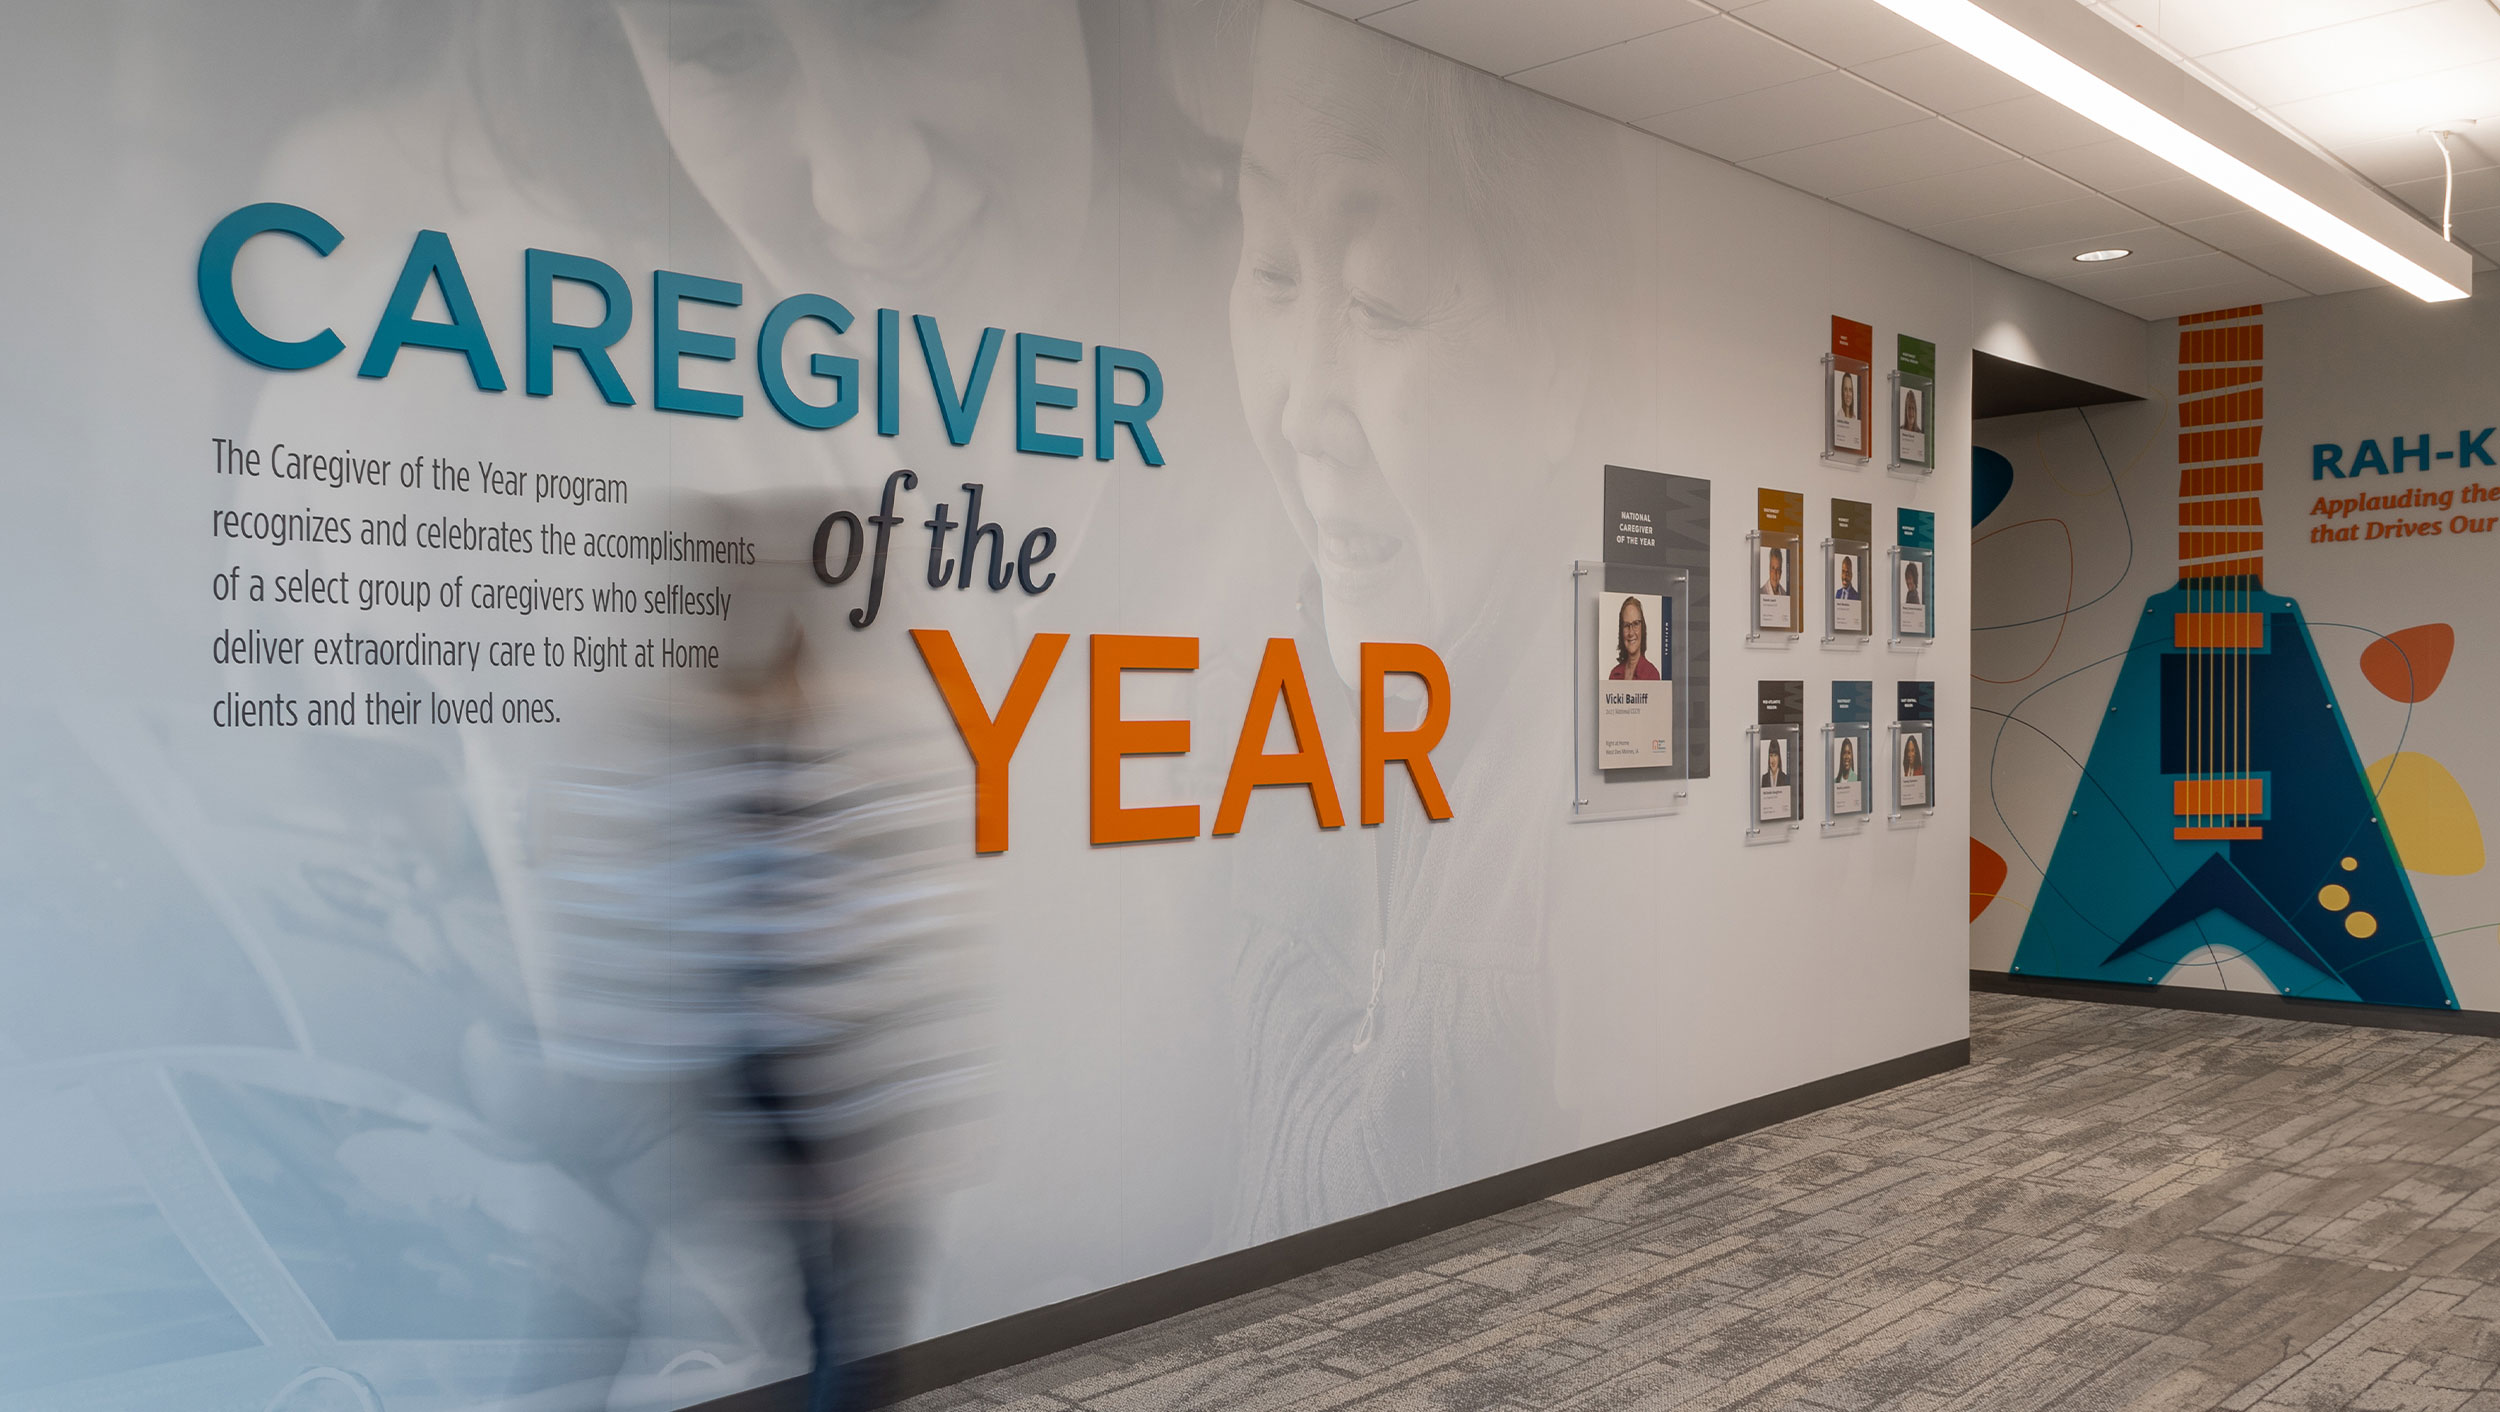 Caregiver of the Year installation at Right at Home HQ in Omaha, NE